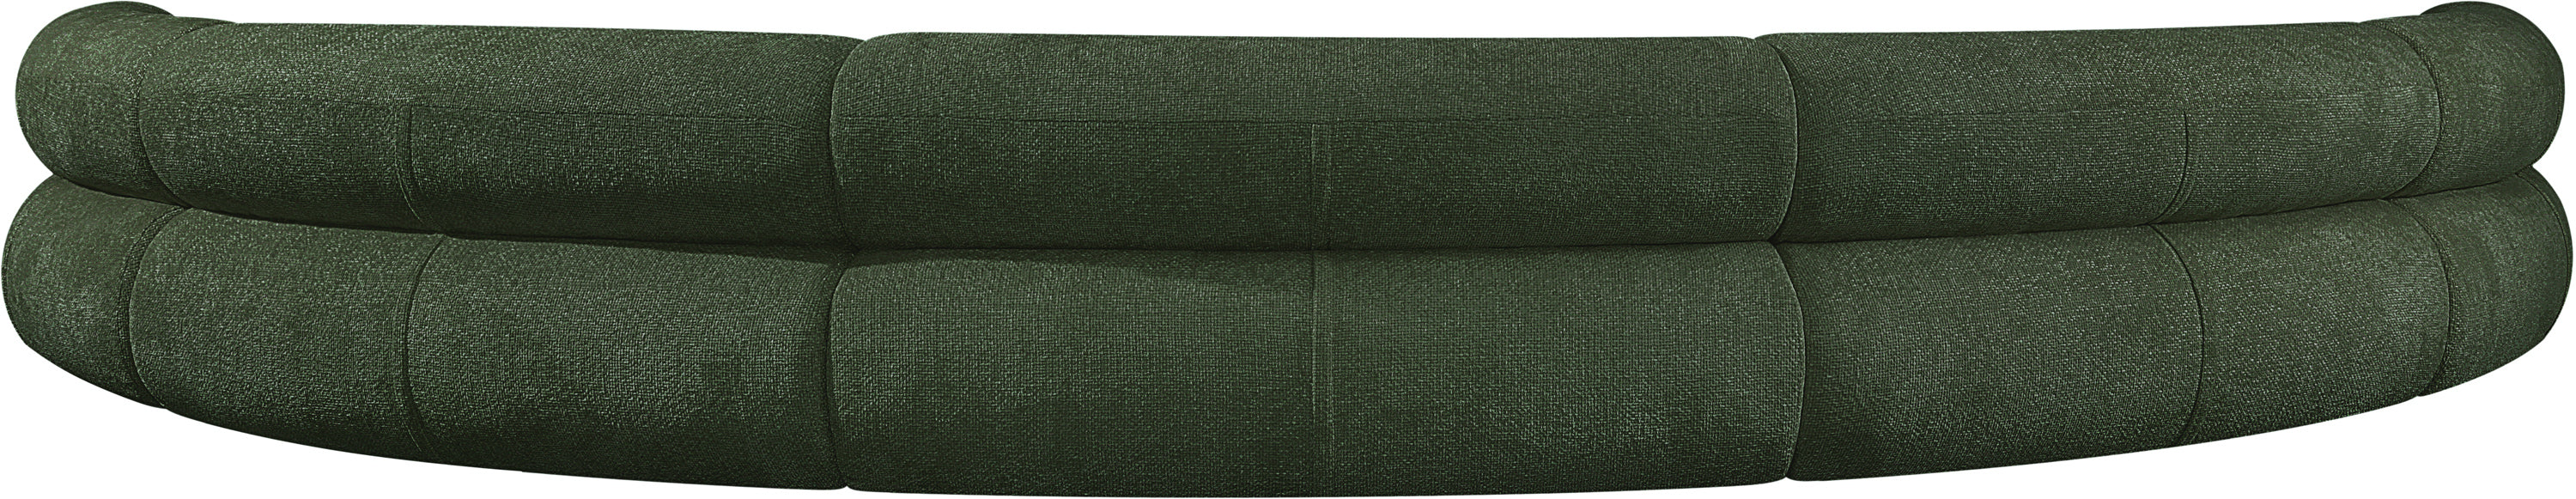 Bale Chenille Fabric 5 pc. Sectional